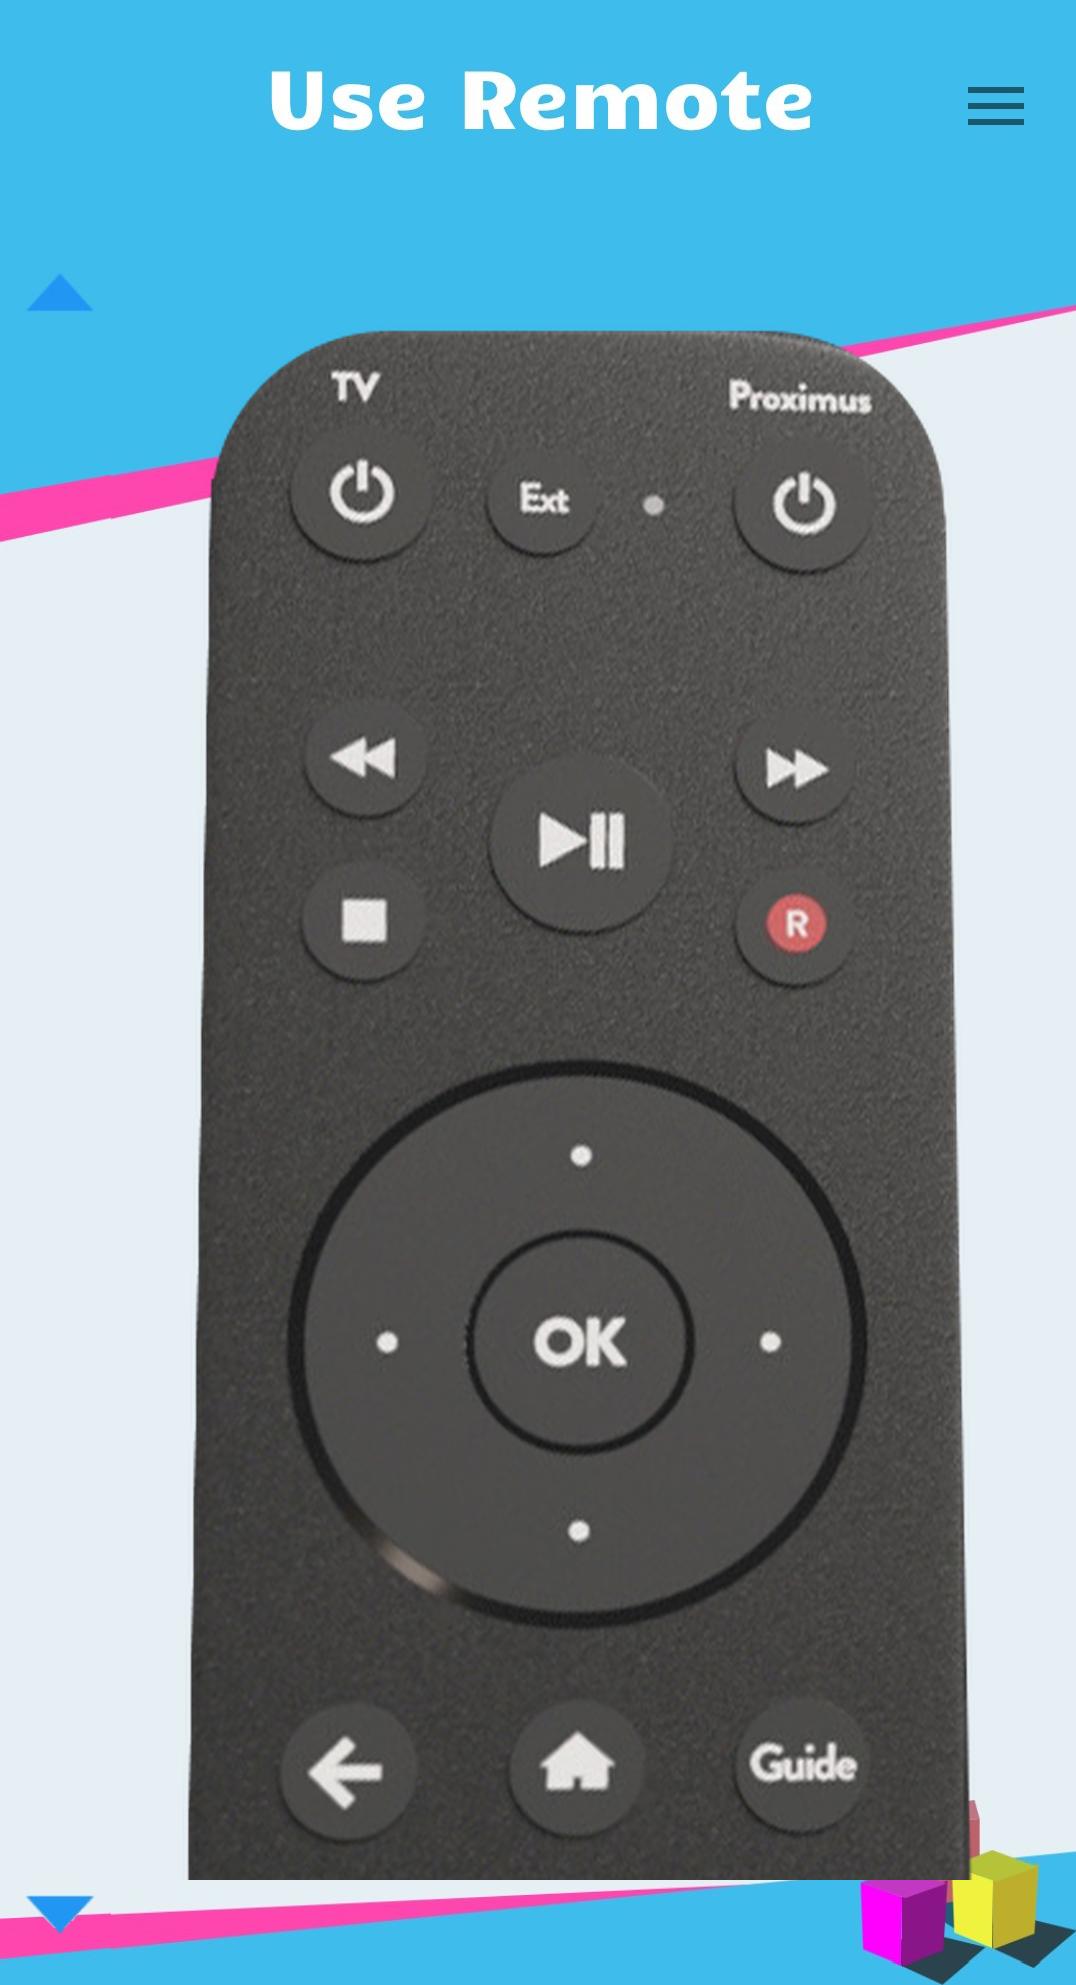 Remote control for Proximus TV for Android - APK Download